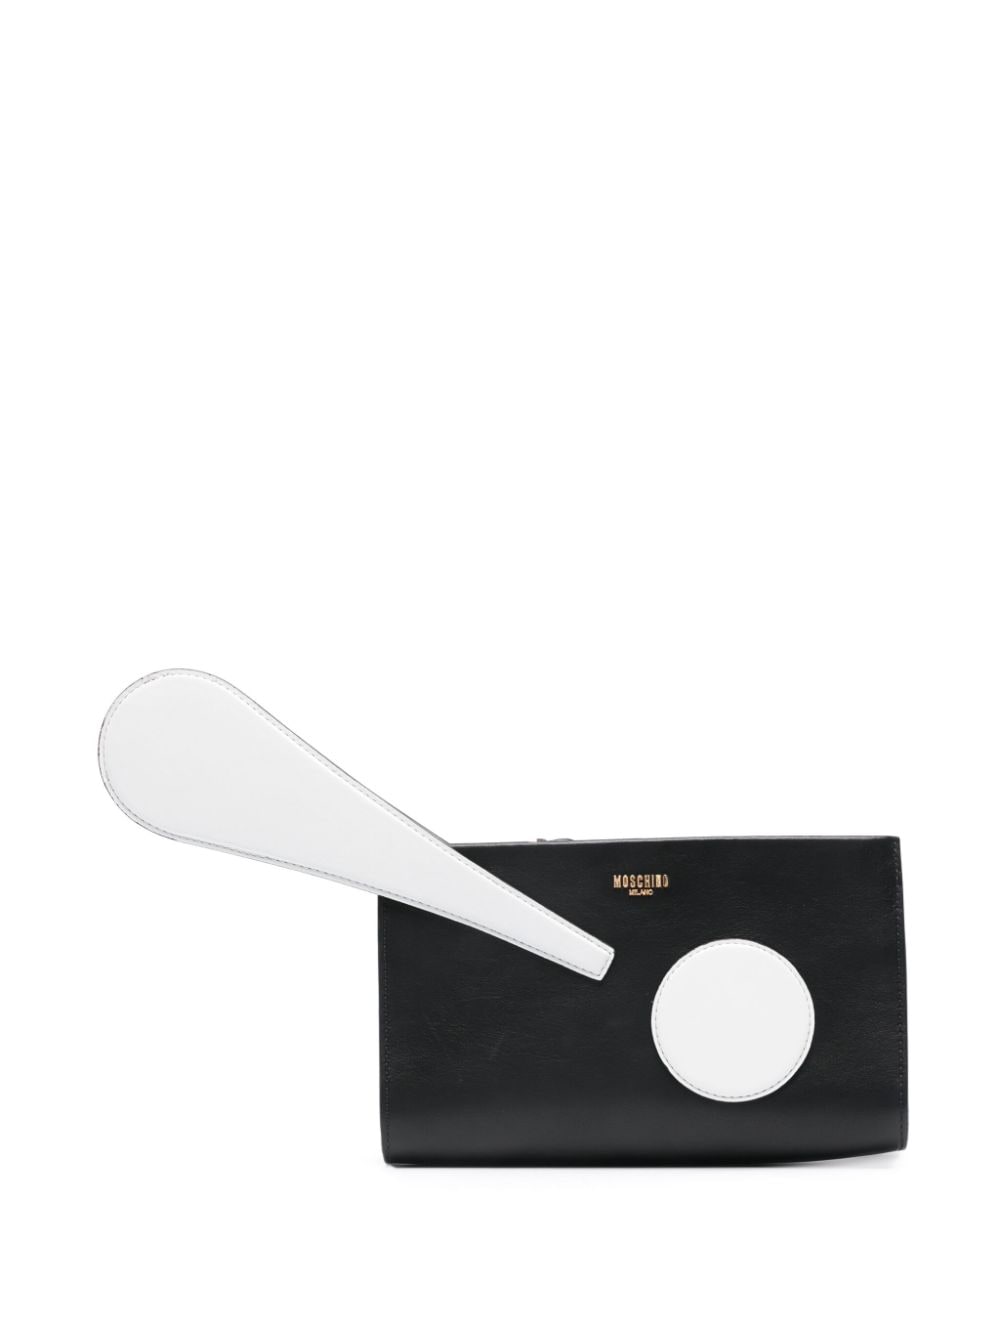 Exclamation mark clutch bag